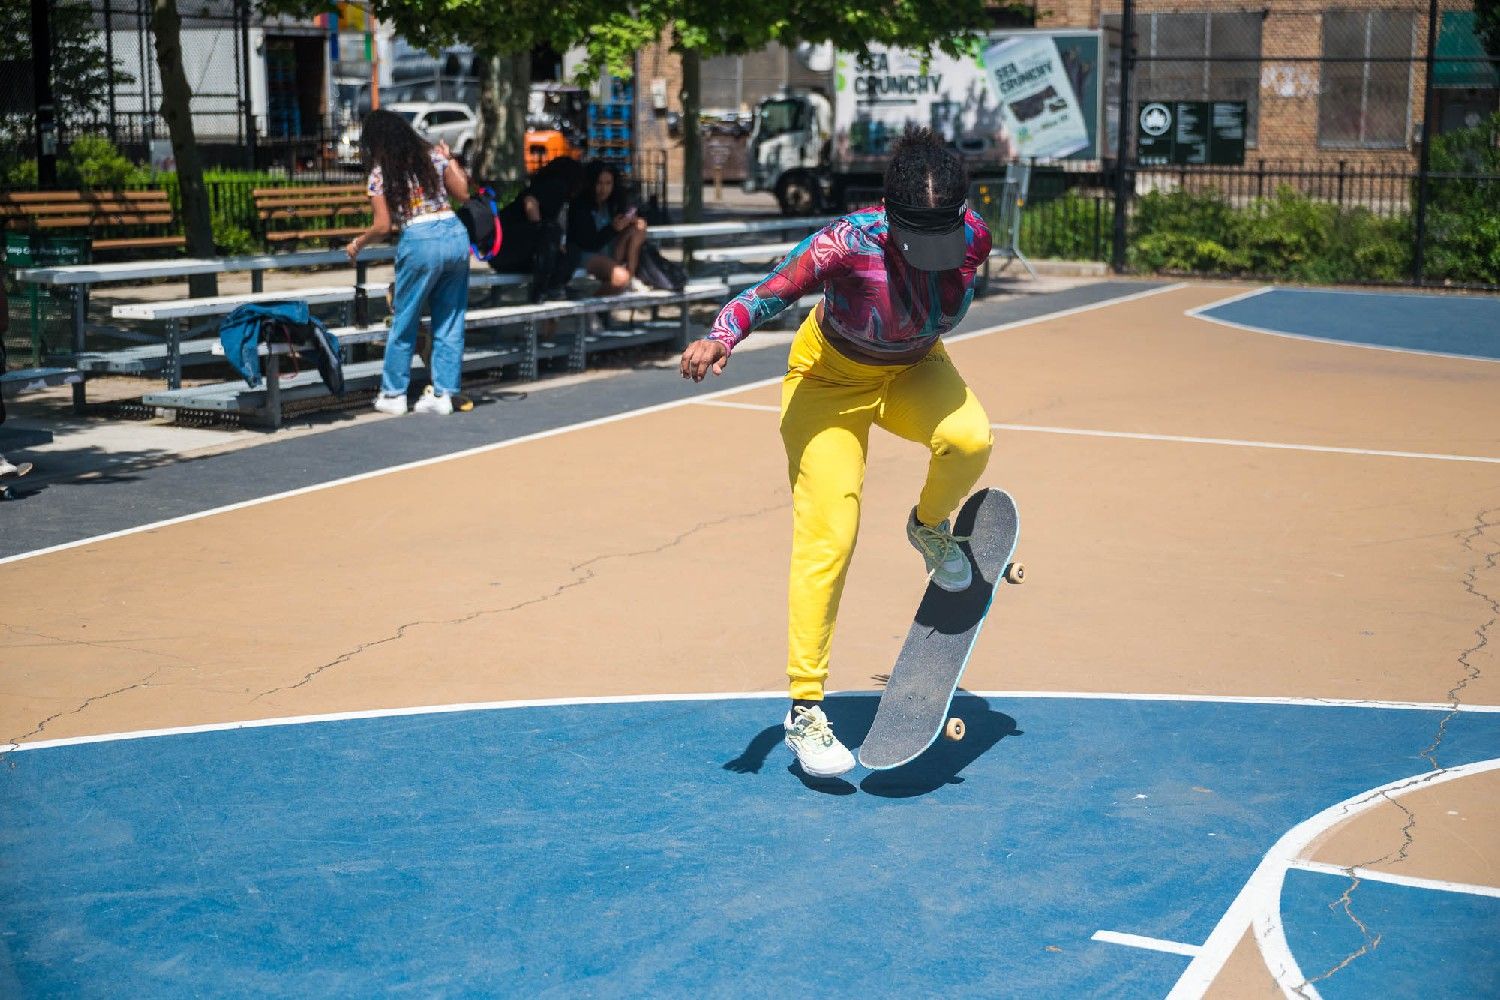 Vasquez skating with her board mid-air. She's wearing a bright-color pink and blue top with yellow pants.